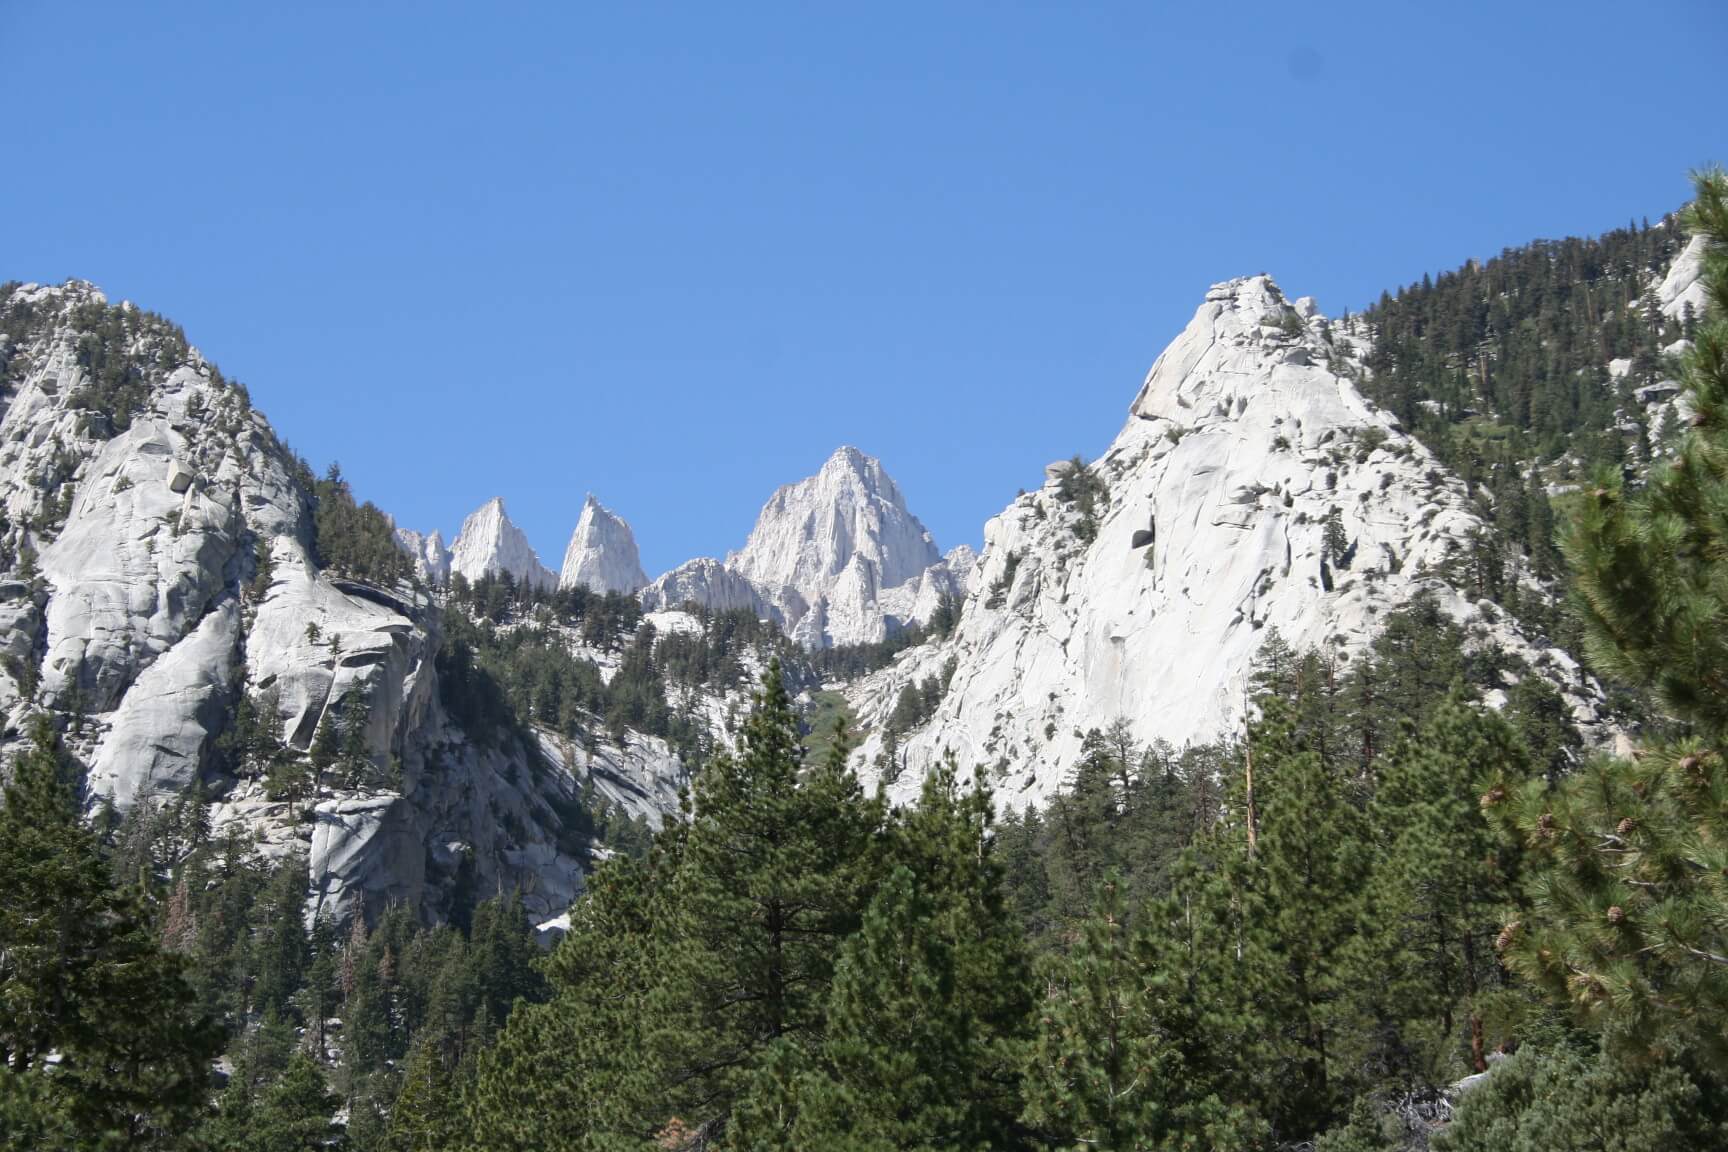 Inyo National Forest Campgrounds Closed - Mt. Whitney